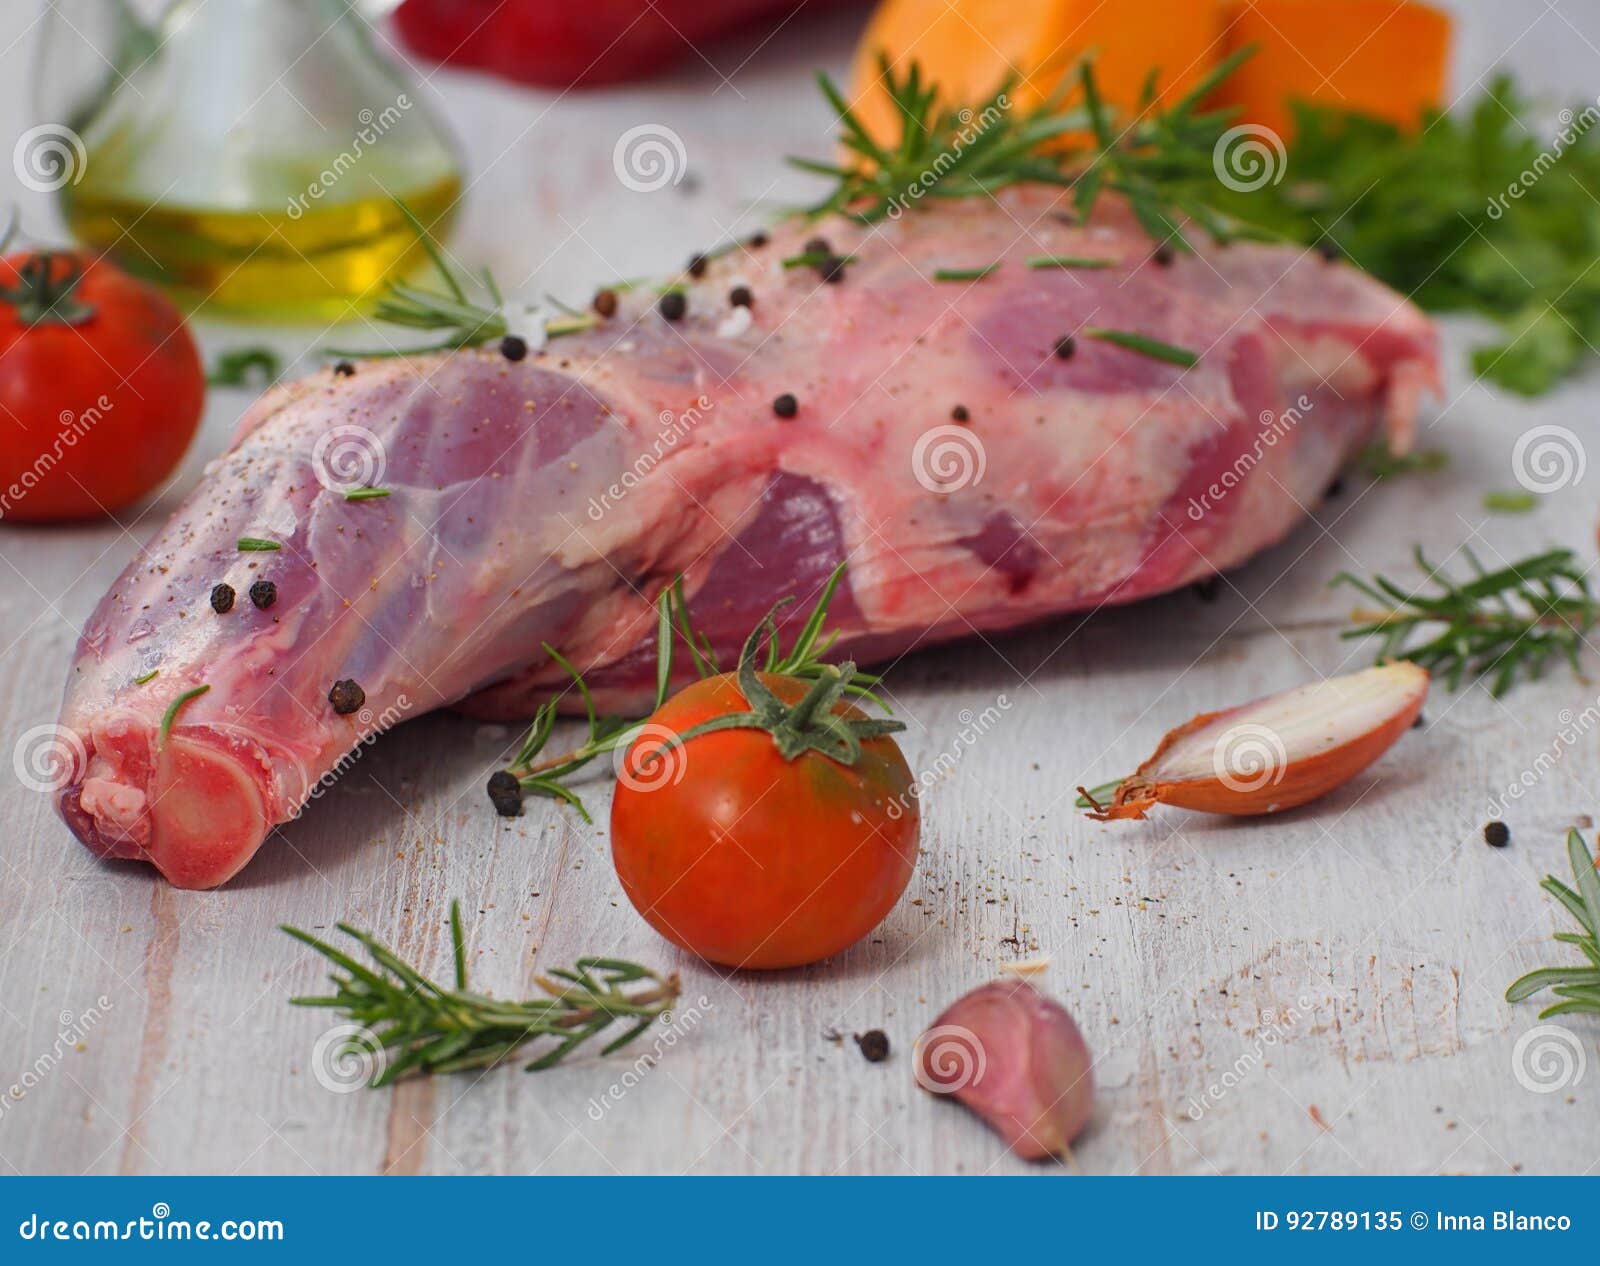 fresh and raw meat. leg of lamb on wood background